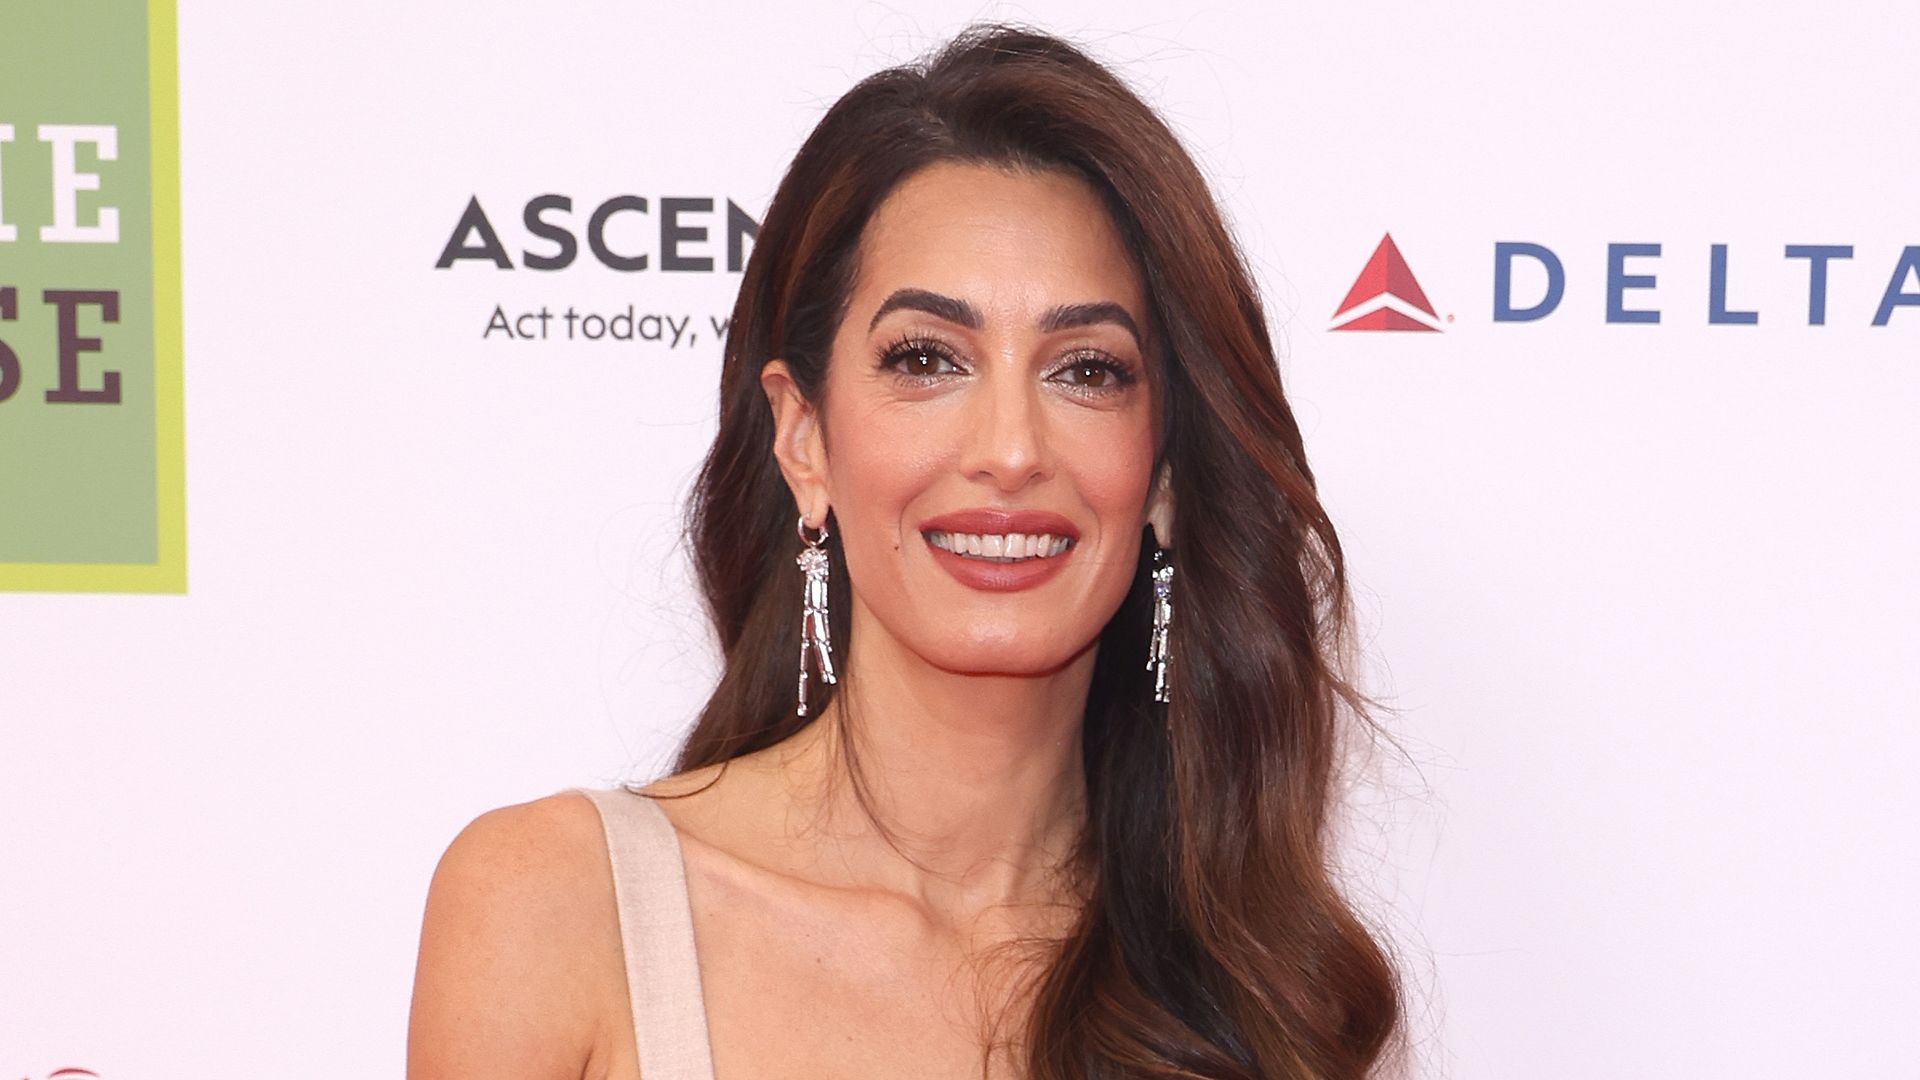 Amal Clooney smiling at a red carpet event